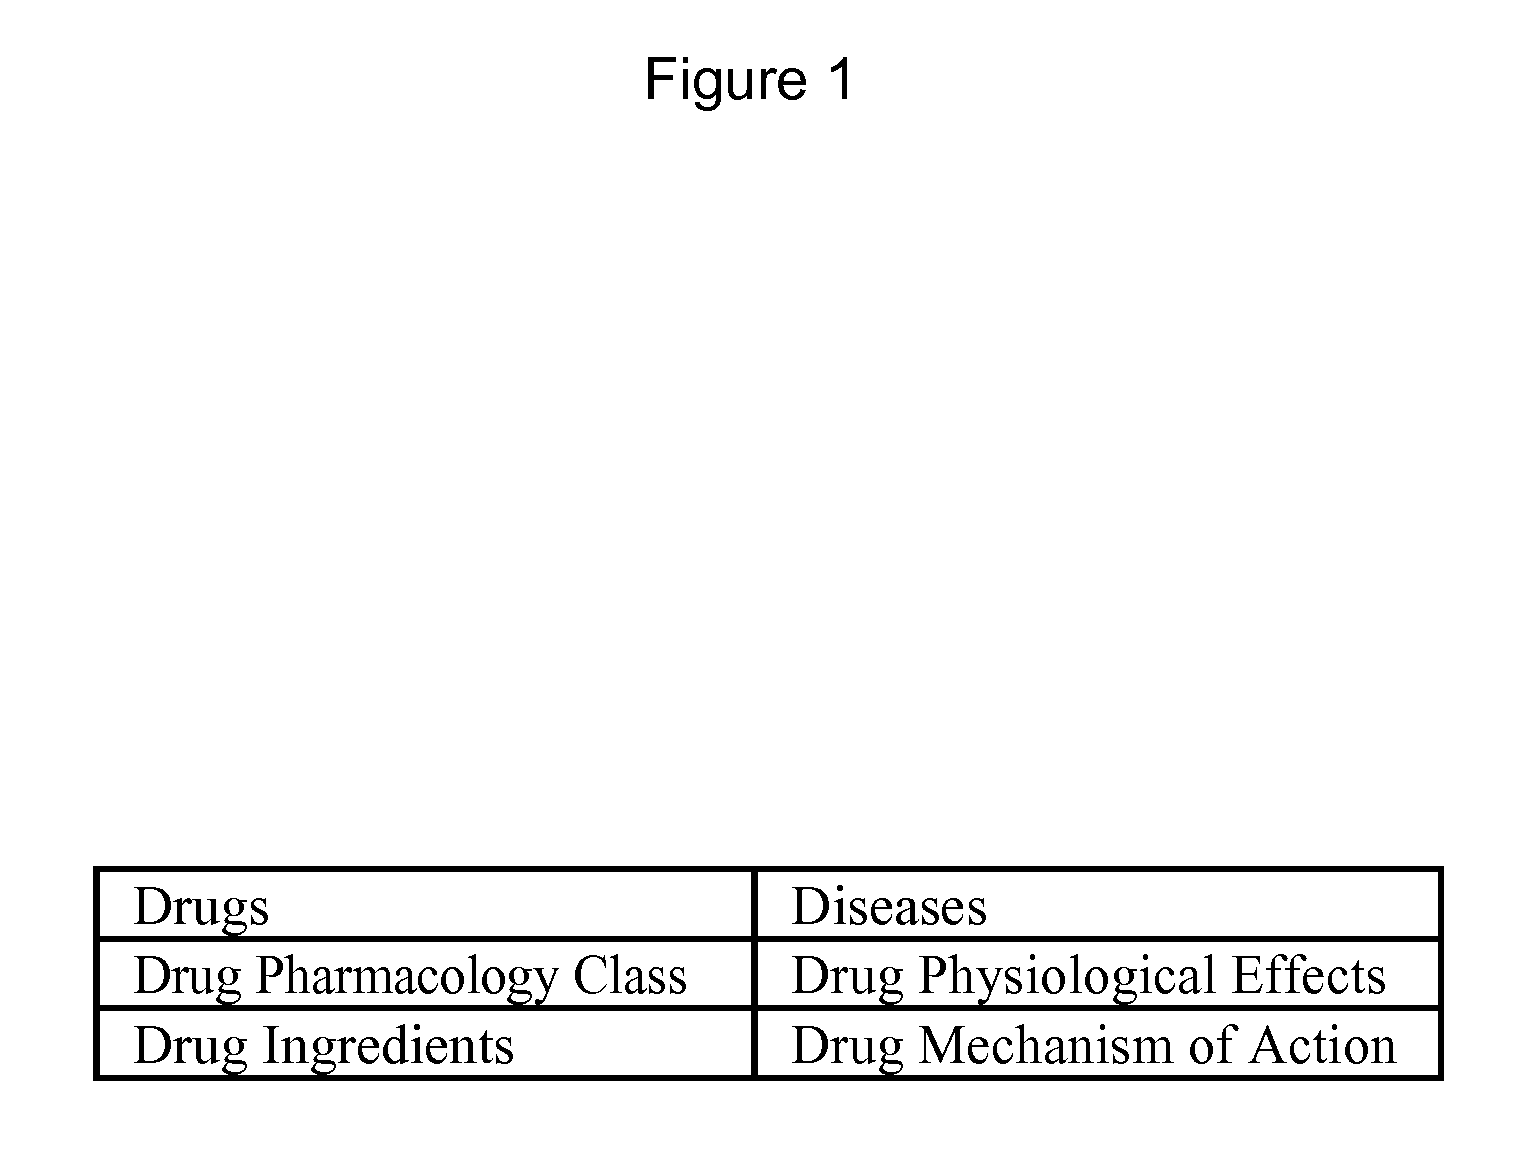 System for Linking Medical Terms for a Medical Knowledge Base